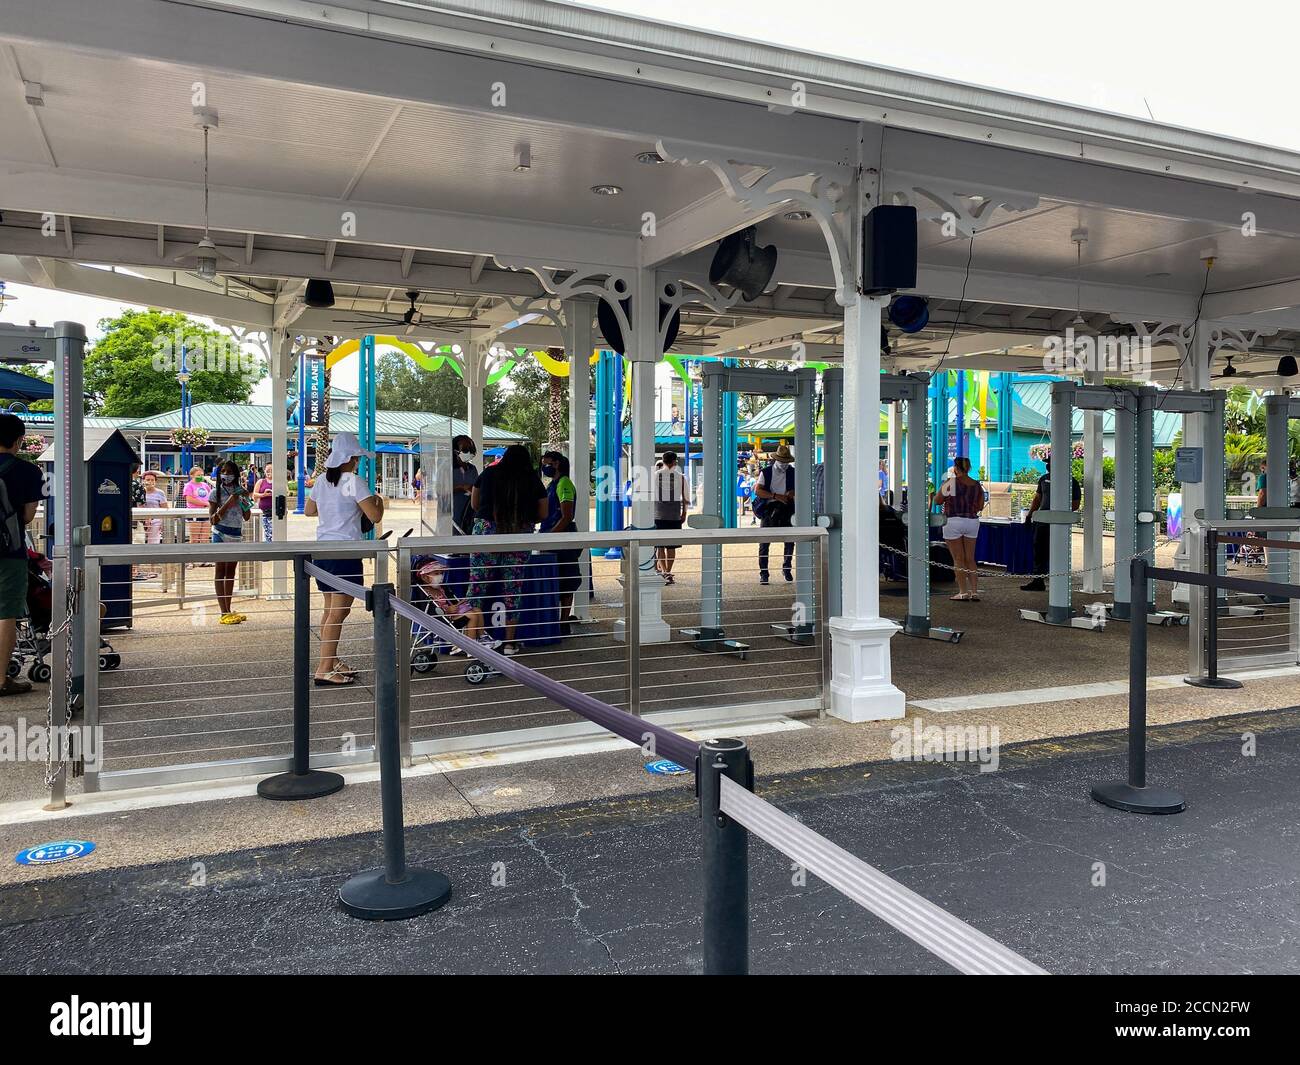 Orlando,FL/USA- 6/19/20: People going through security and bag check at  Seaworld in Orlando, Florida wearing face masks and social distancing Stock  Photo - Alamy